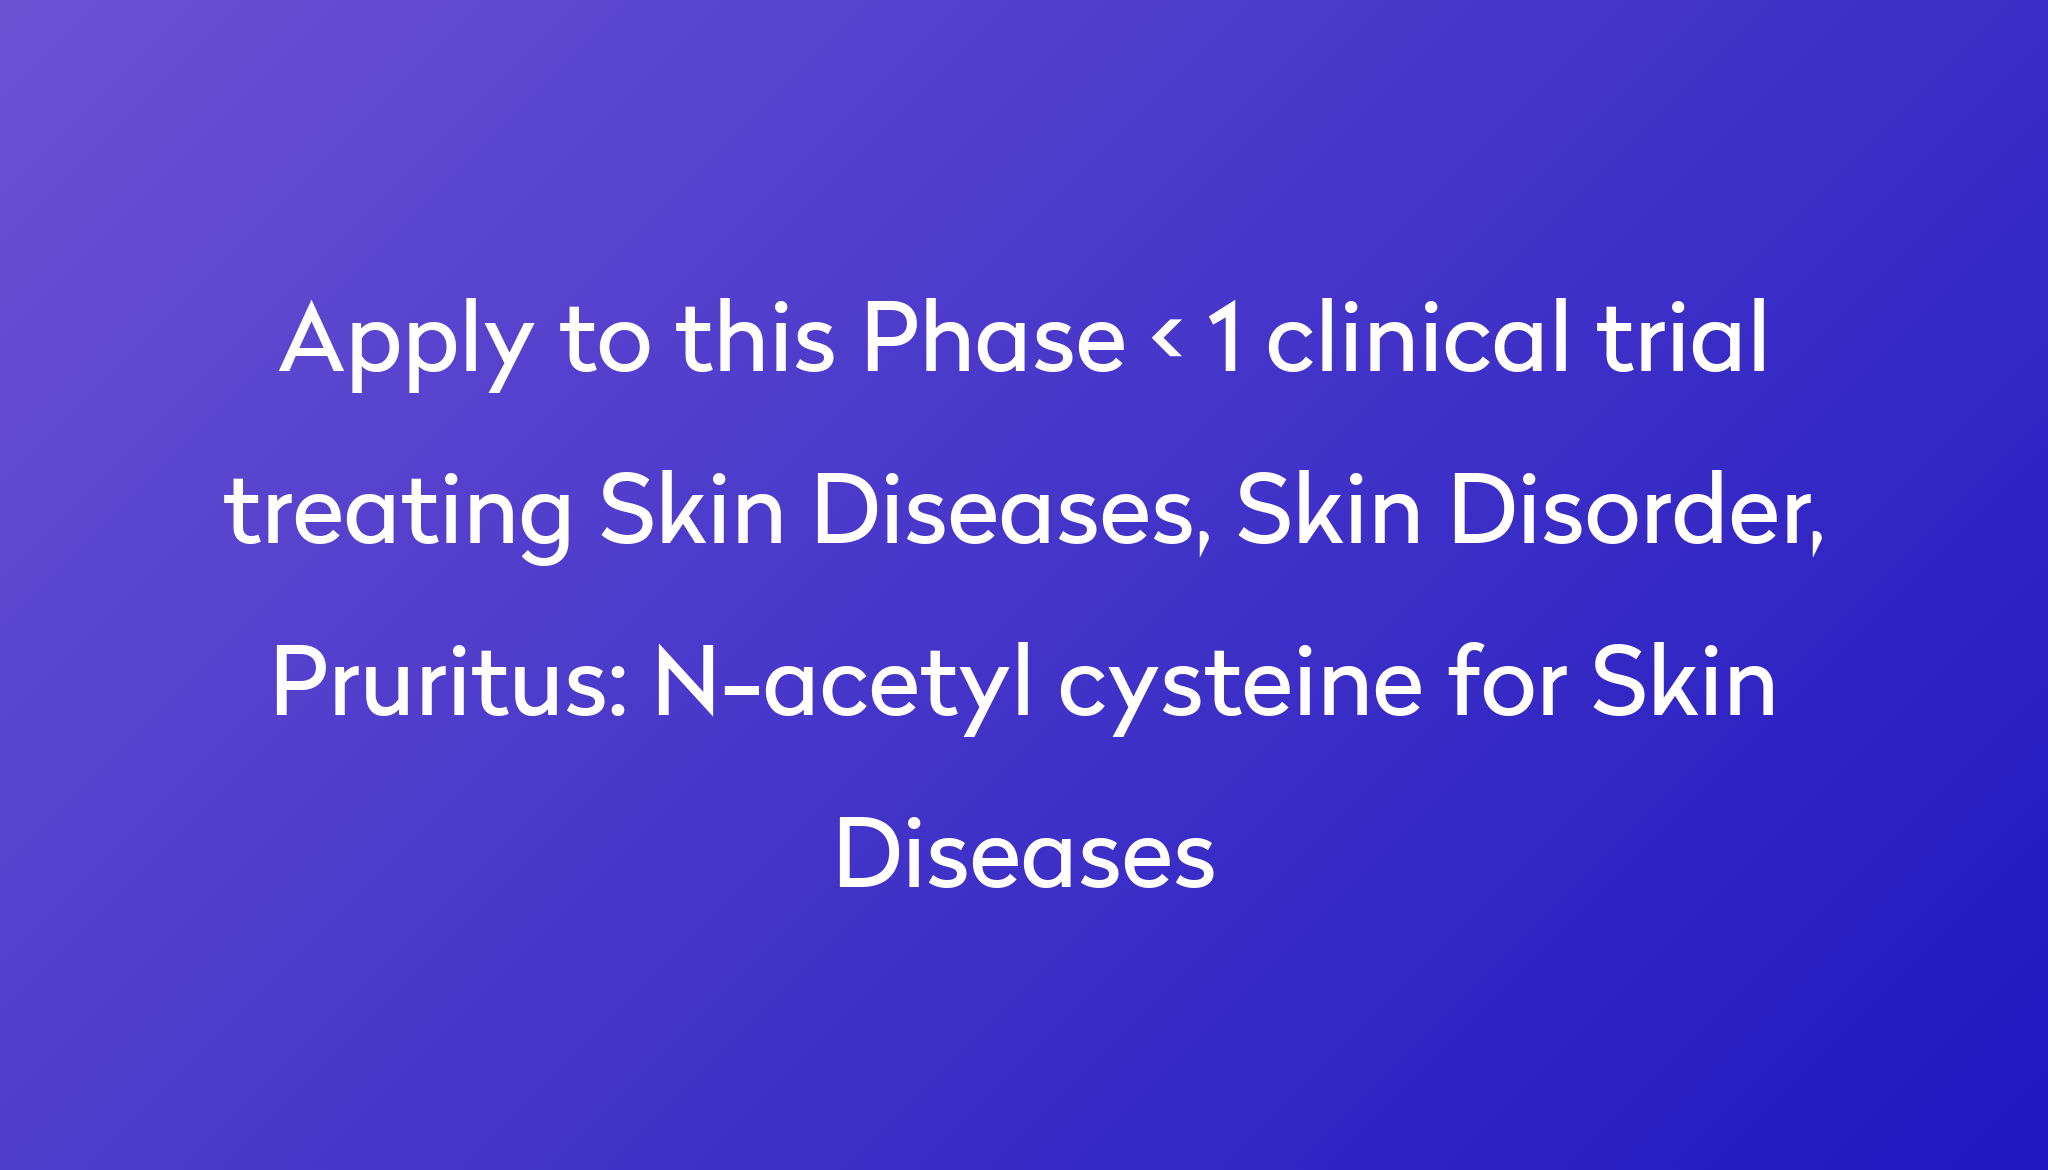 N acetyl cysteine for Skin Diseases Clinical Trial 20   Power